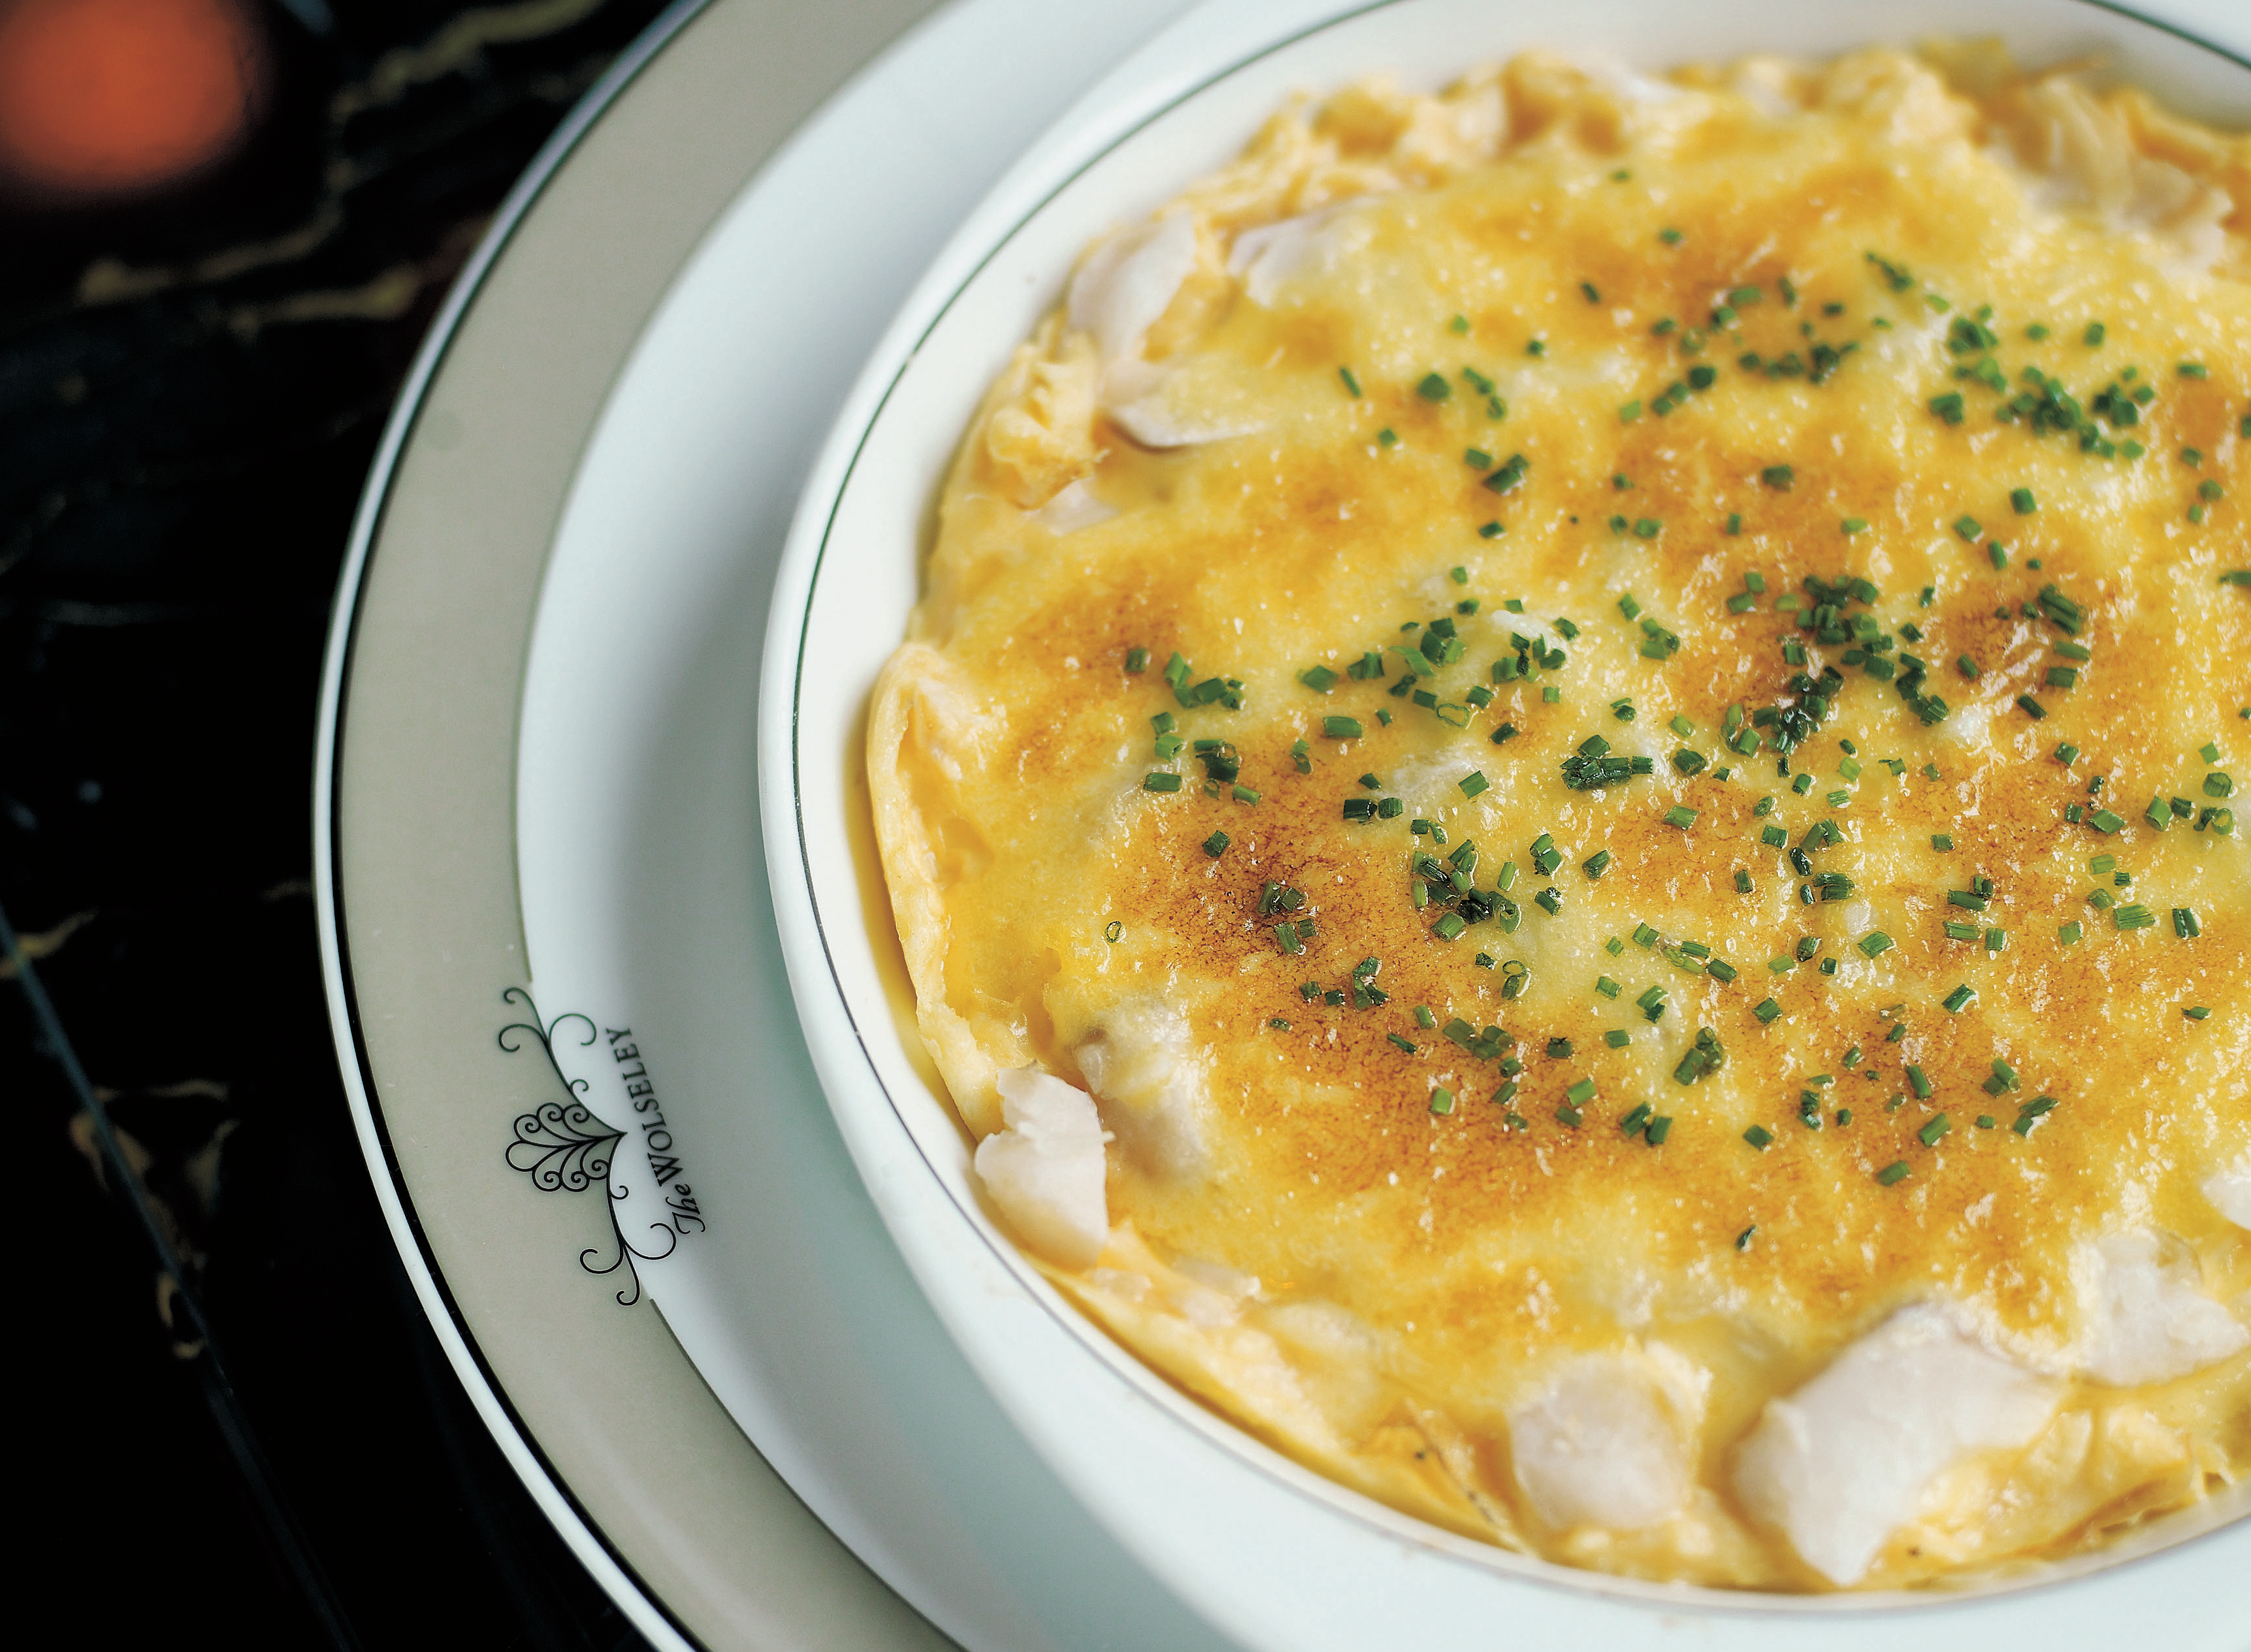 Omelette Arnold Bennett at The Wolesley on Piccadilly, a second breakfast spot that forms part of the best 24 hour restaurant travel itinerary for London — where to eat with one day in the city